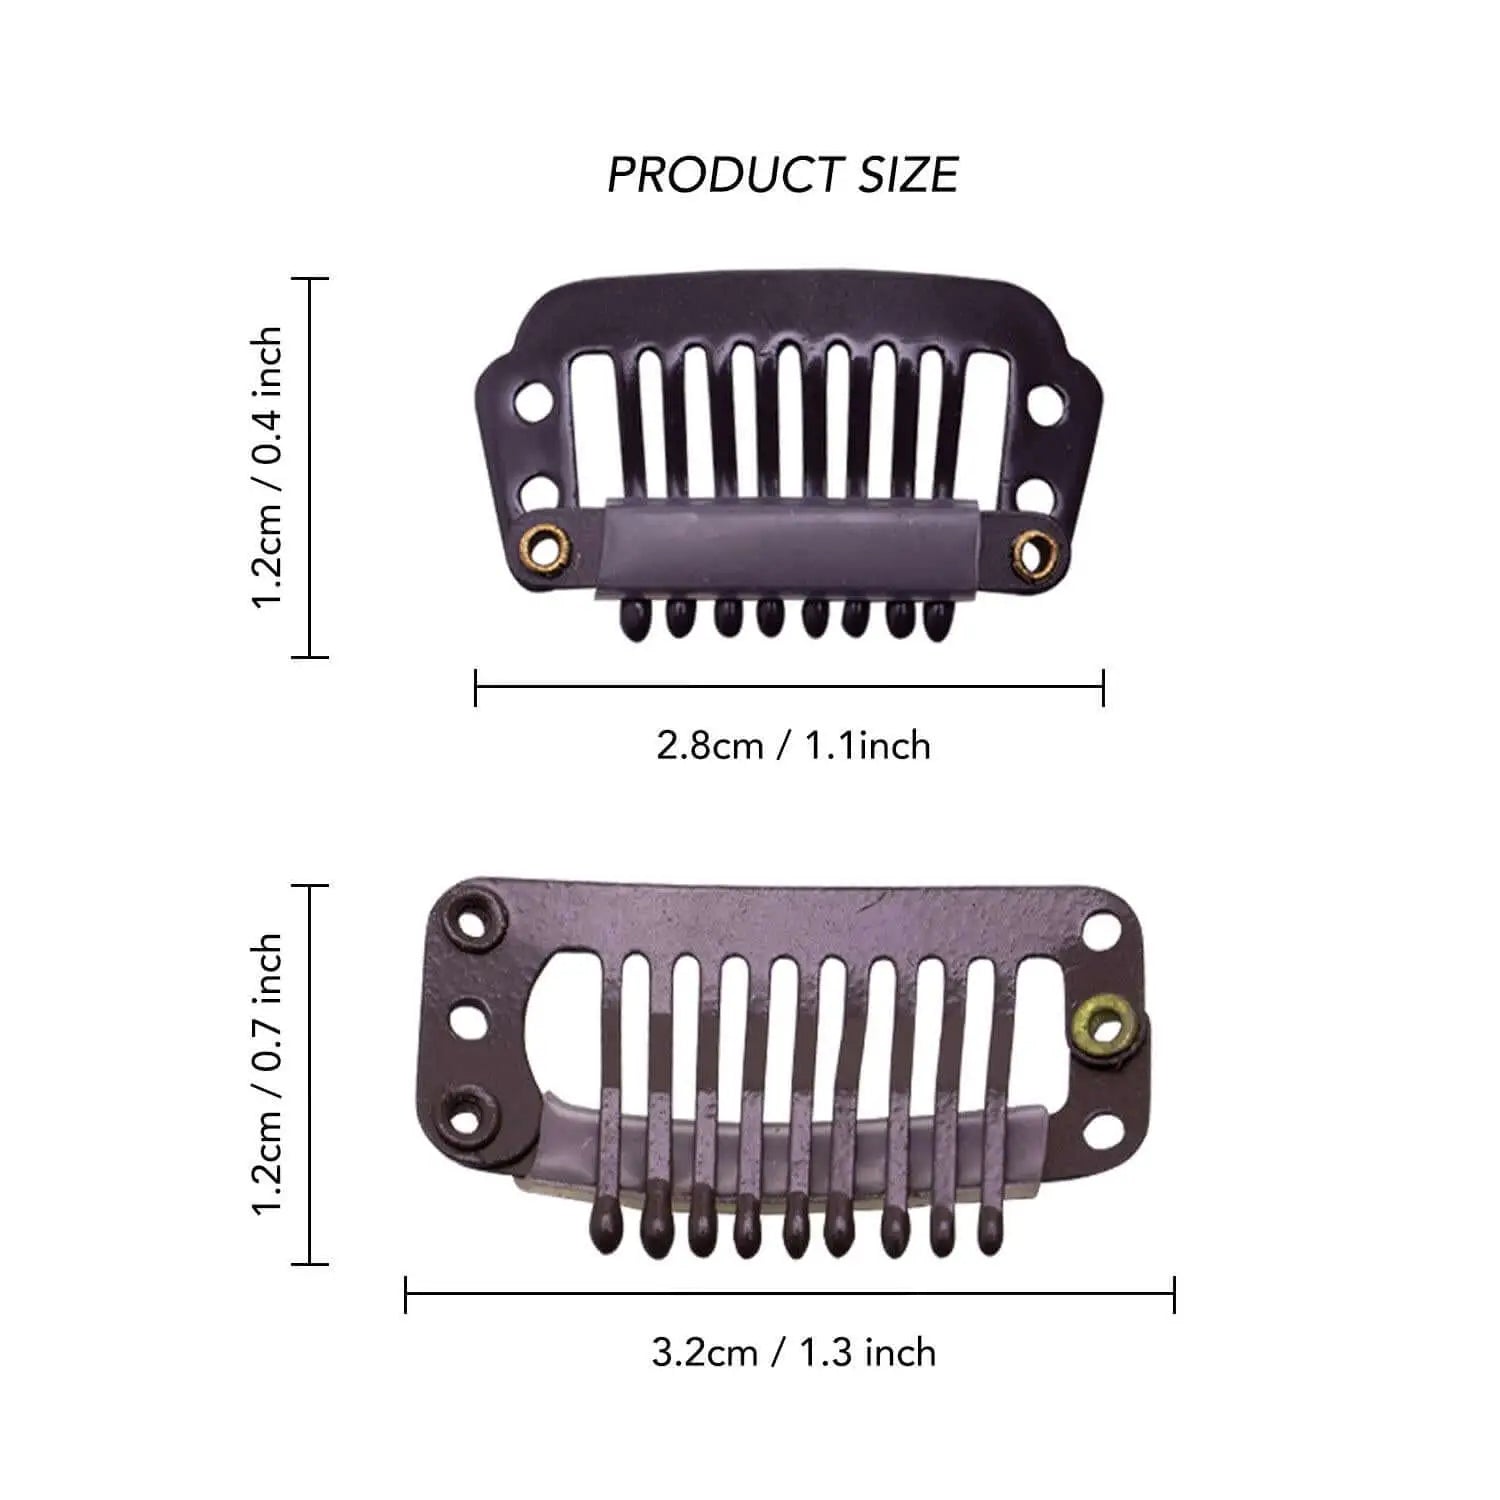 Hair Extension Snap Clips Set with two combs in various sizes and shapes